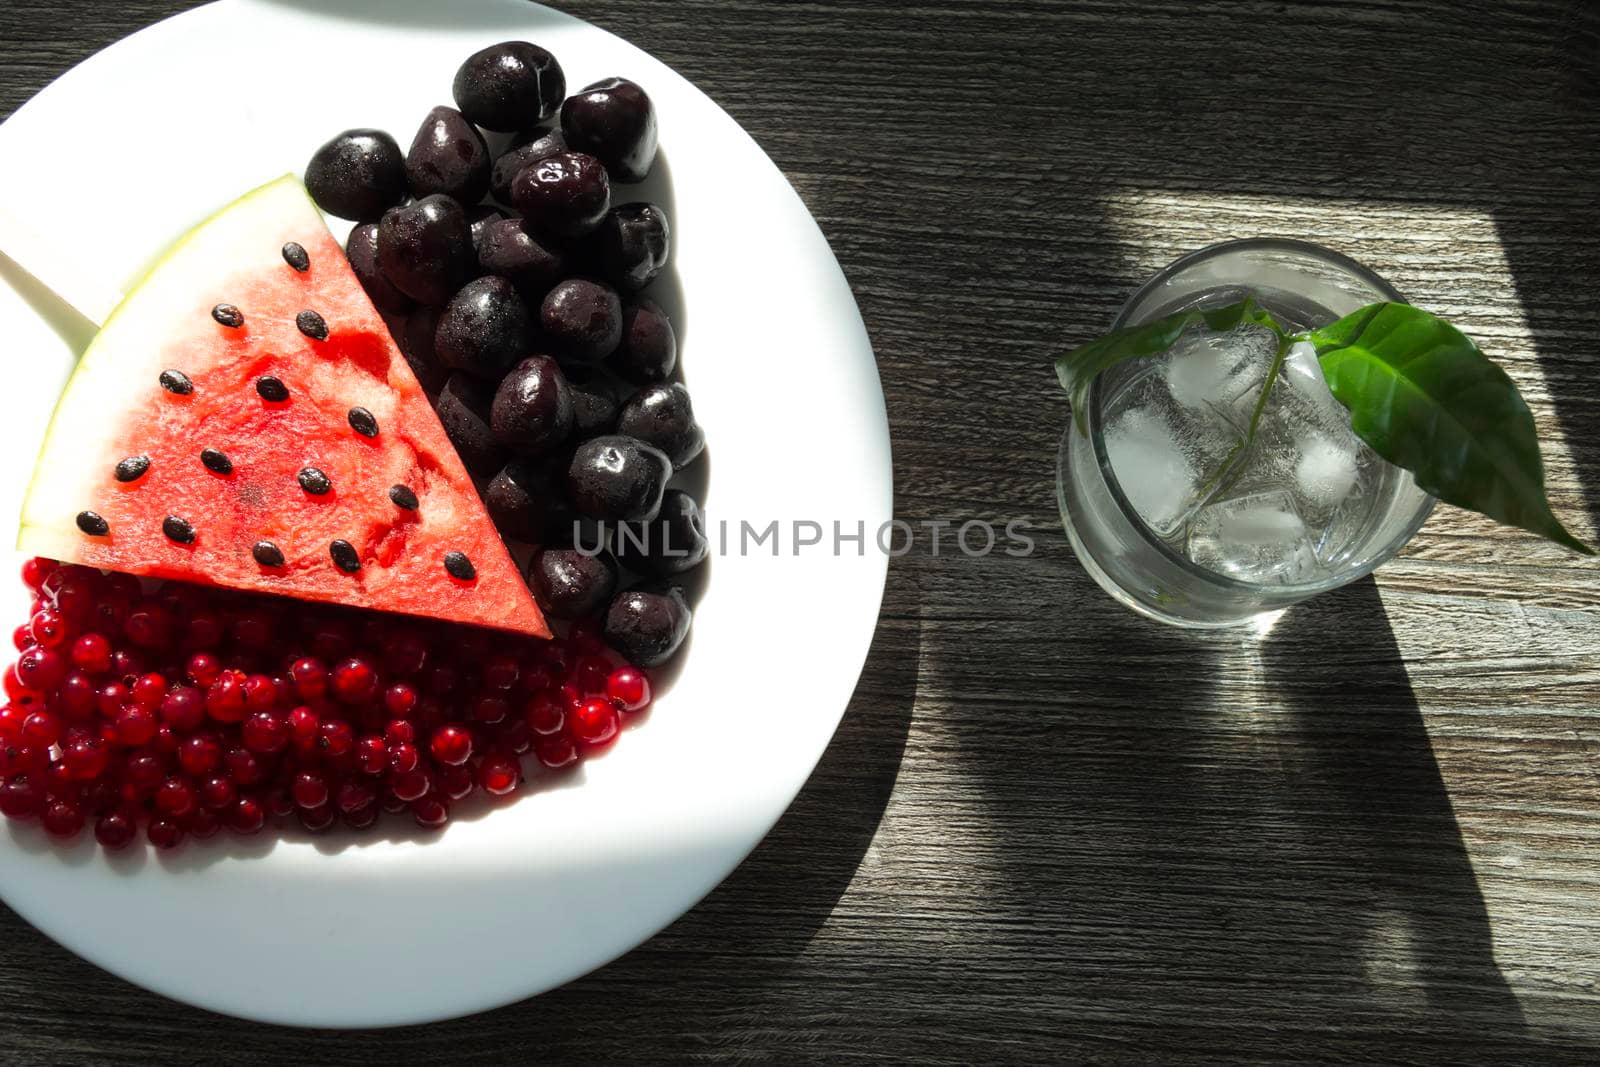 Summer snack. Fresh berries and fruits on a wooden table with green leaves of plants.